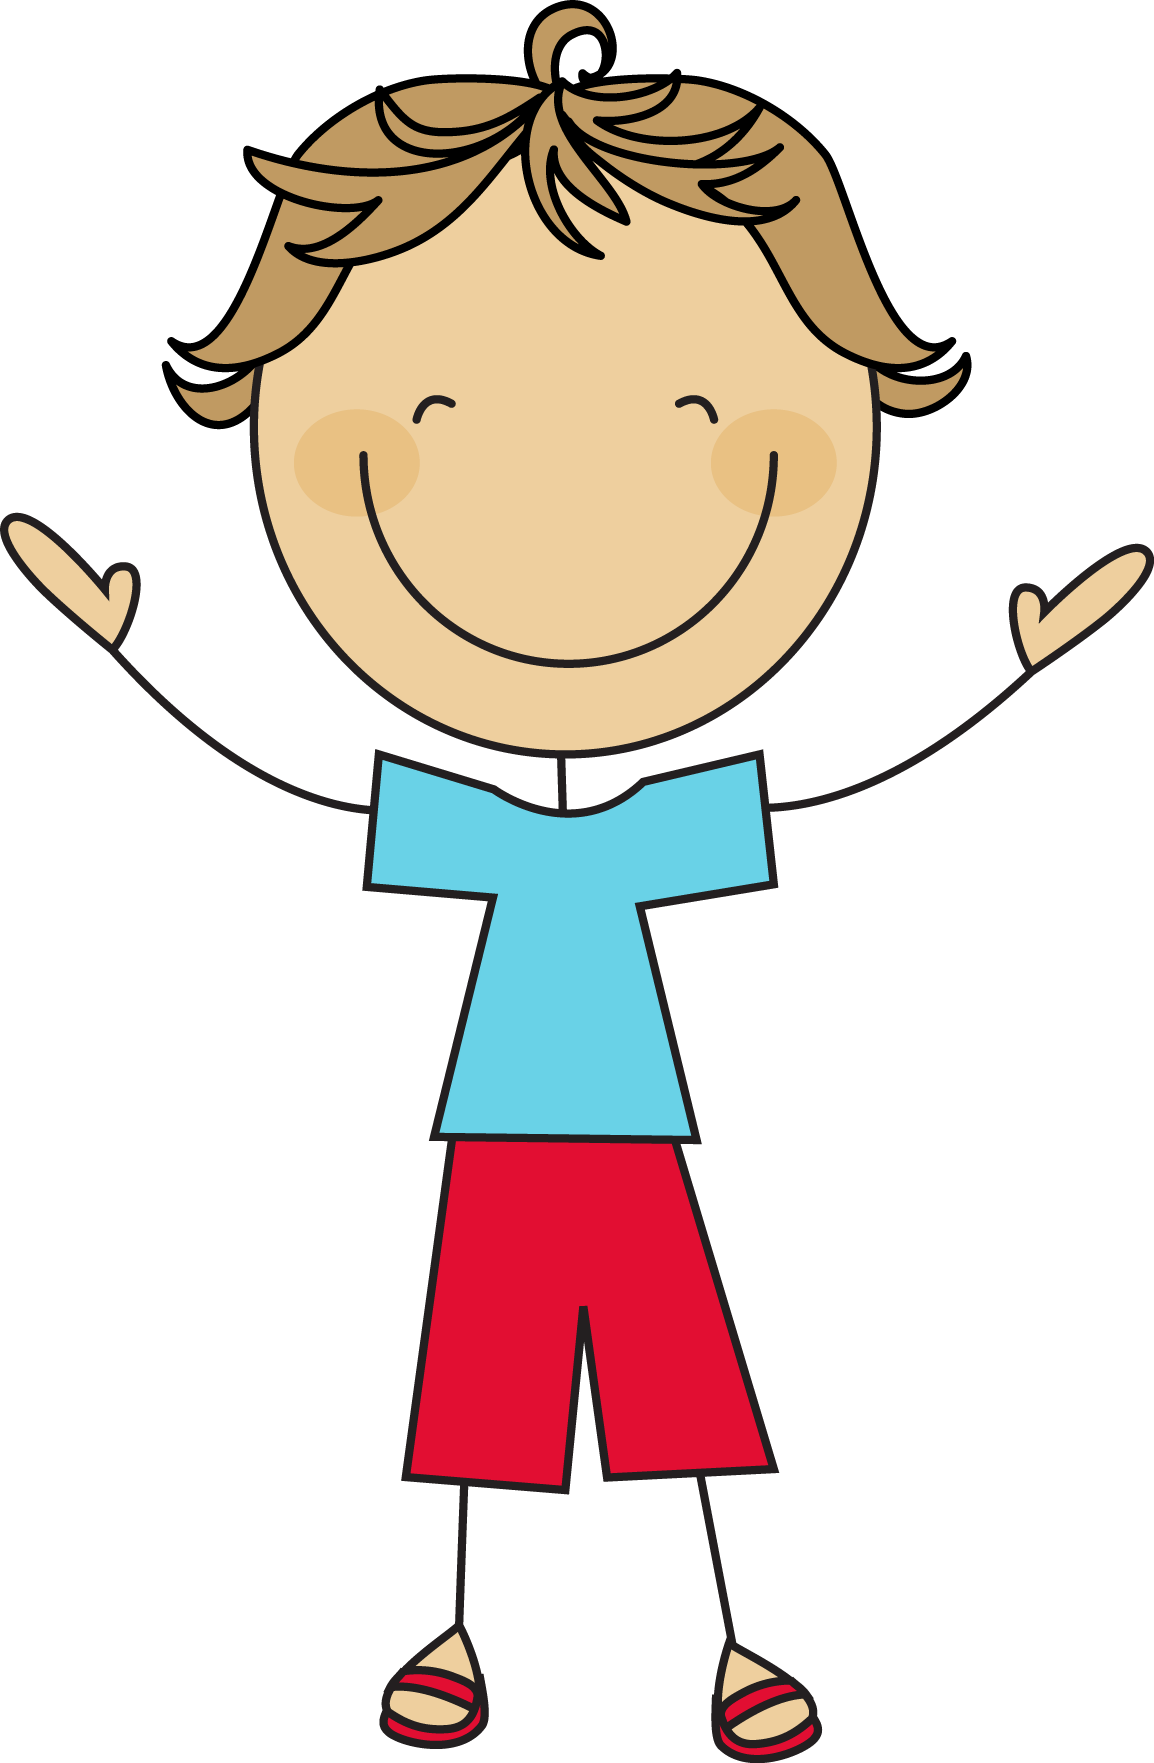 A Cartoon Of A Boy With Arms Up